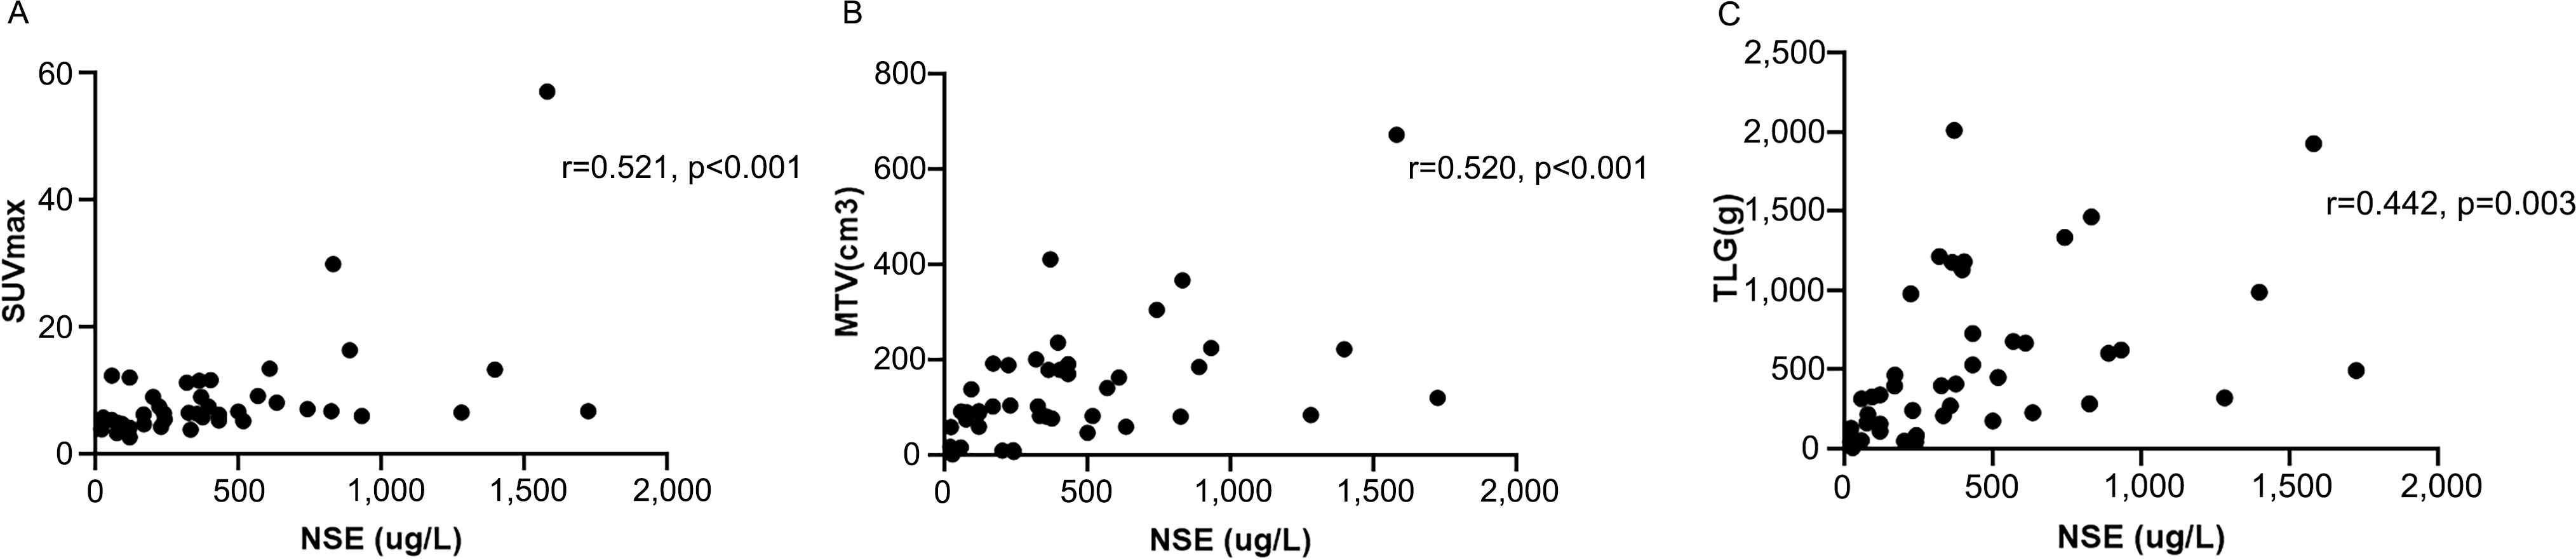 Association between serum NSE and metabolic parameters determined by 18F-FDG PET/CT in pediatric patients with neuroblastoma